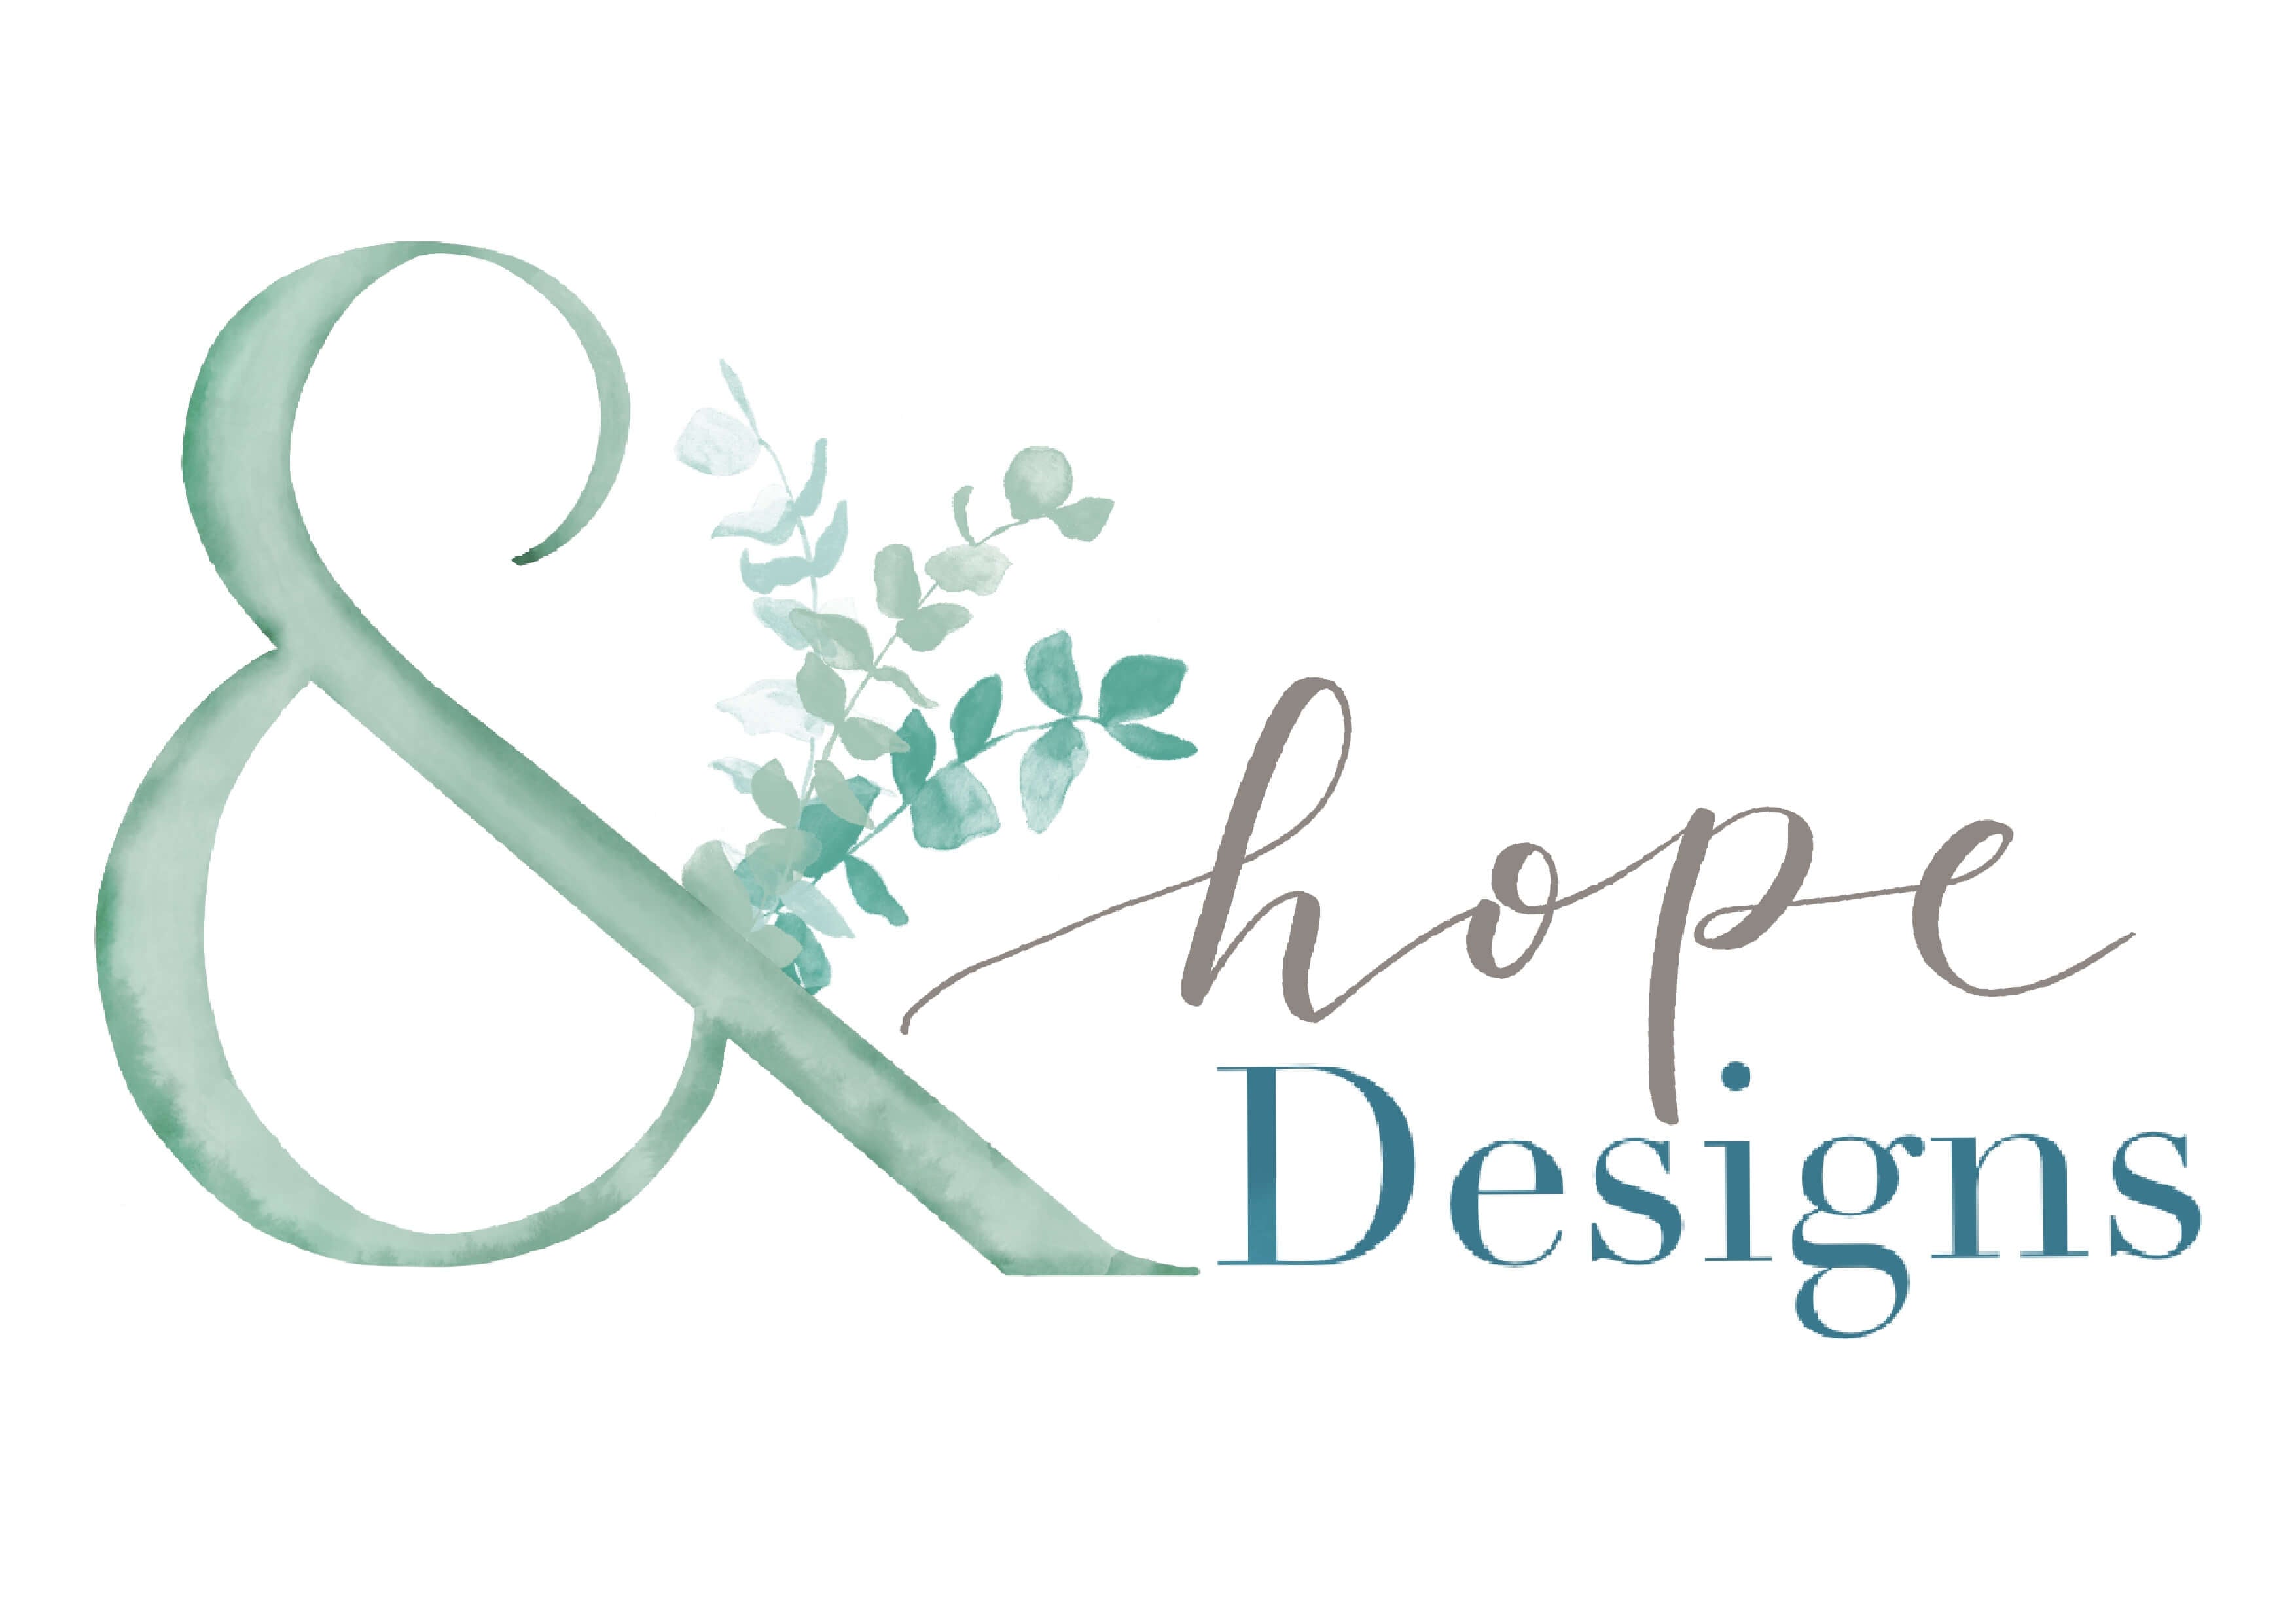 And Hope designs logo made up of a mint green ampersand flourished with eucalyptus, the word Hope hand lettered in taupe and the word designs in a blue serif font.